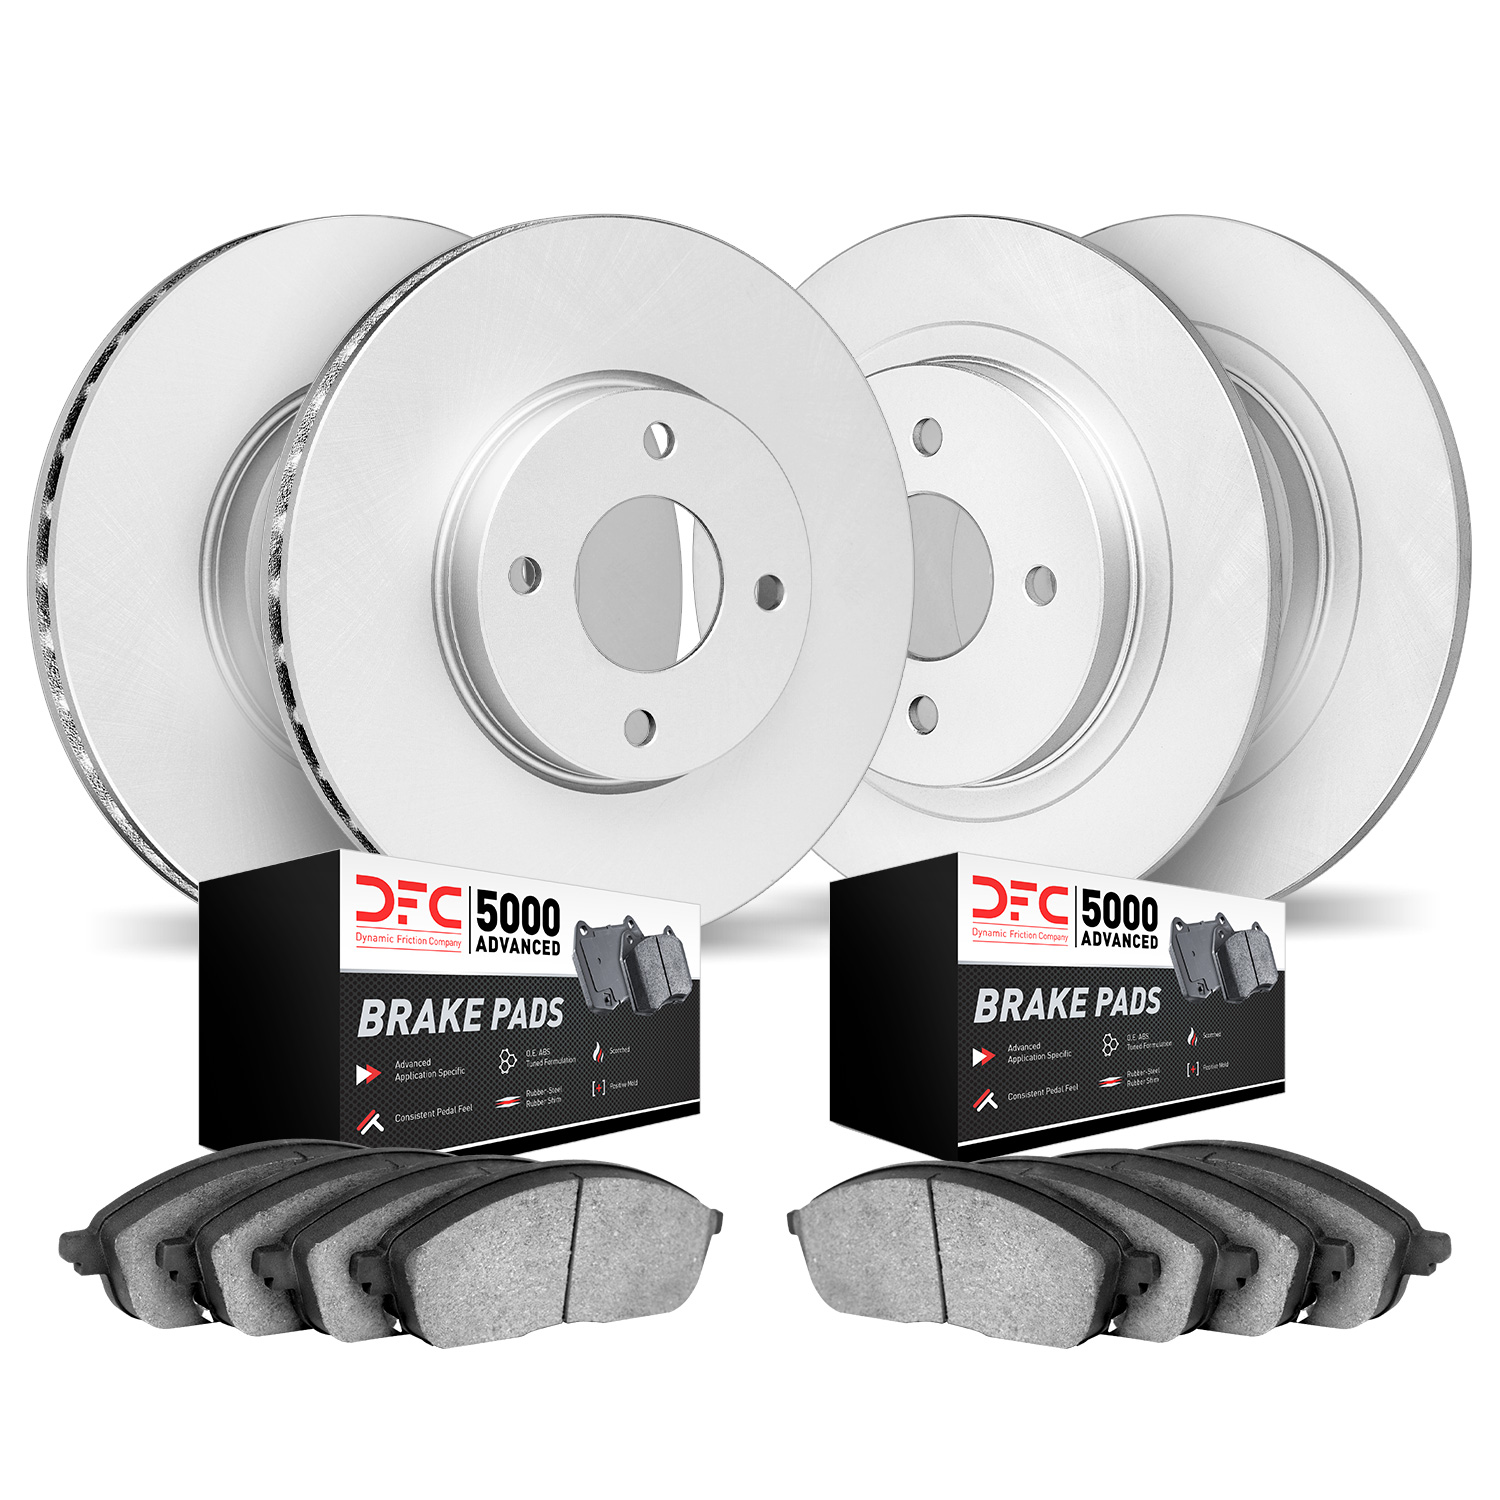 4504-80026 Geospec Brake Rotors w/5000 Advanced Brake Pads Kit, Fits Select Multiple Makes/Models, Position: Front and Rear